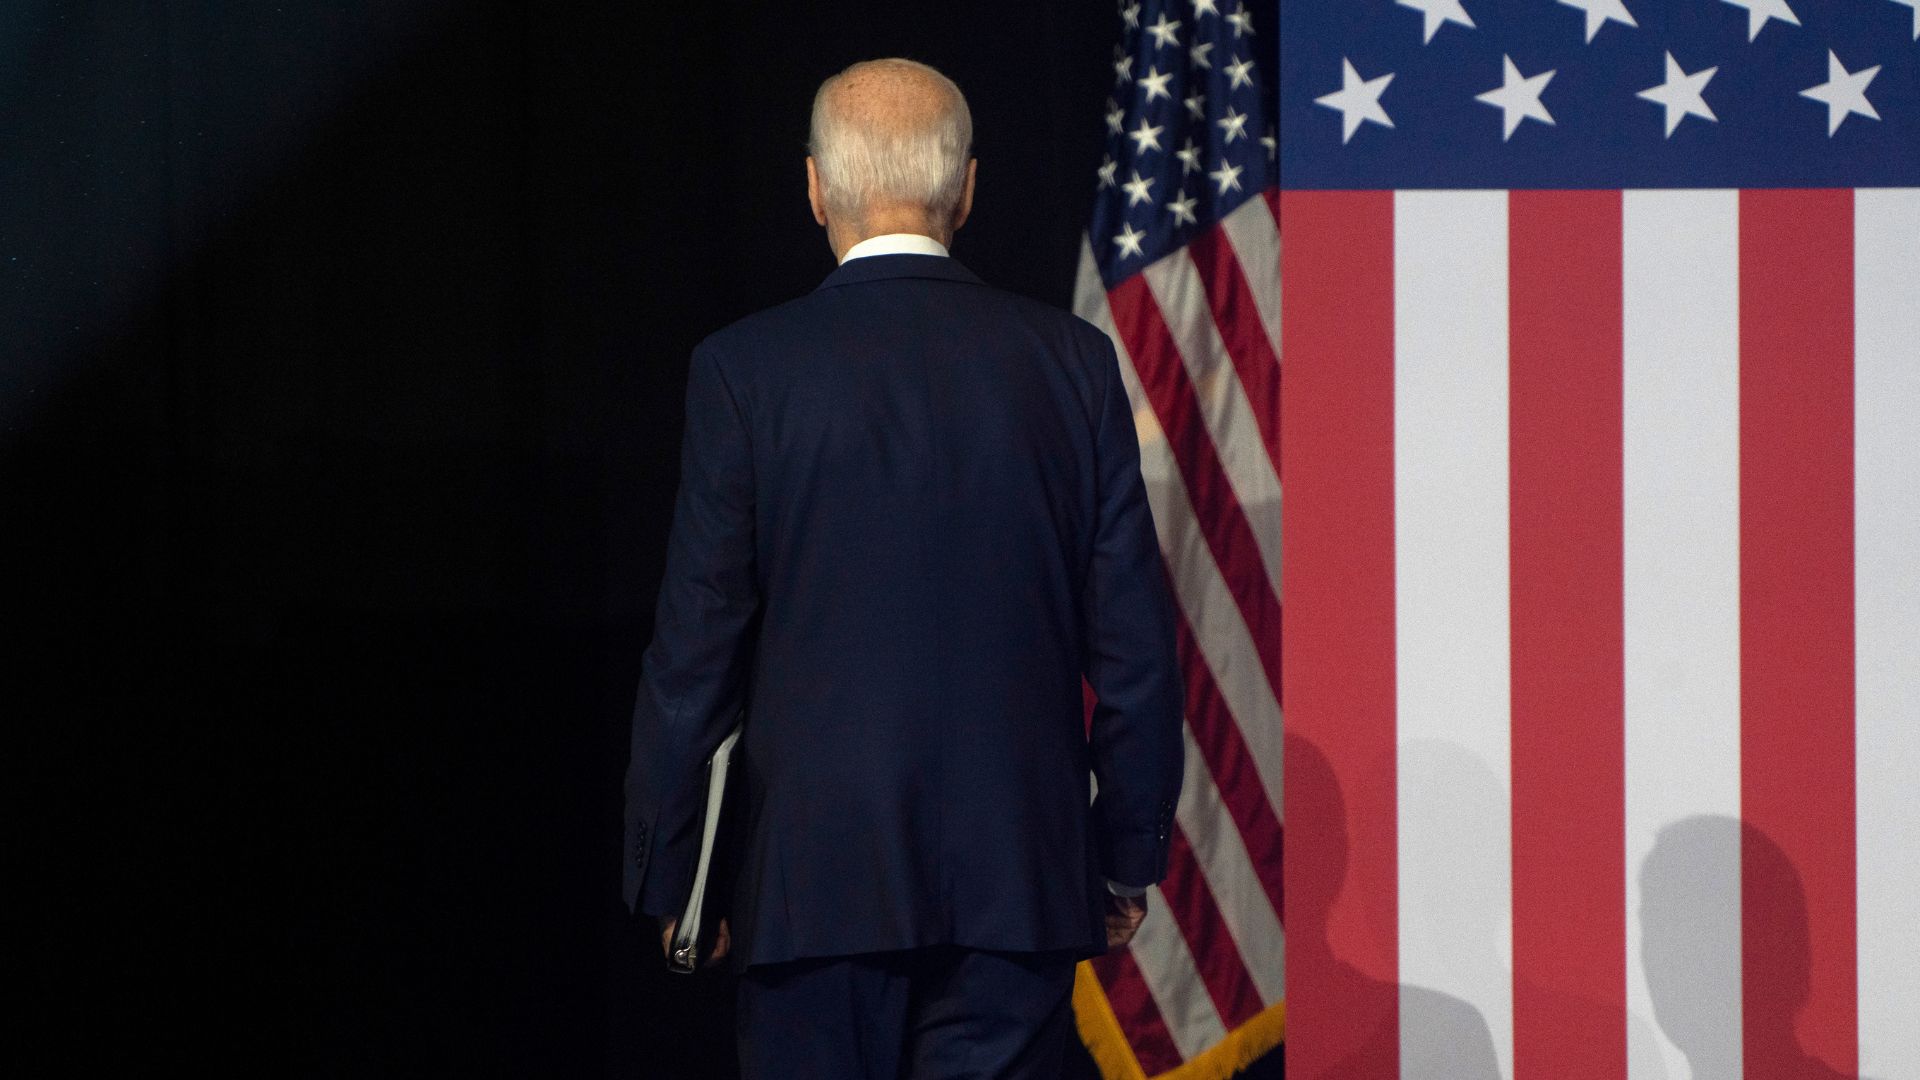 Where The Hell Is Biden? President AWOL As Americans Killed, Held Hostage In Terrorist Attack